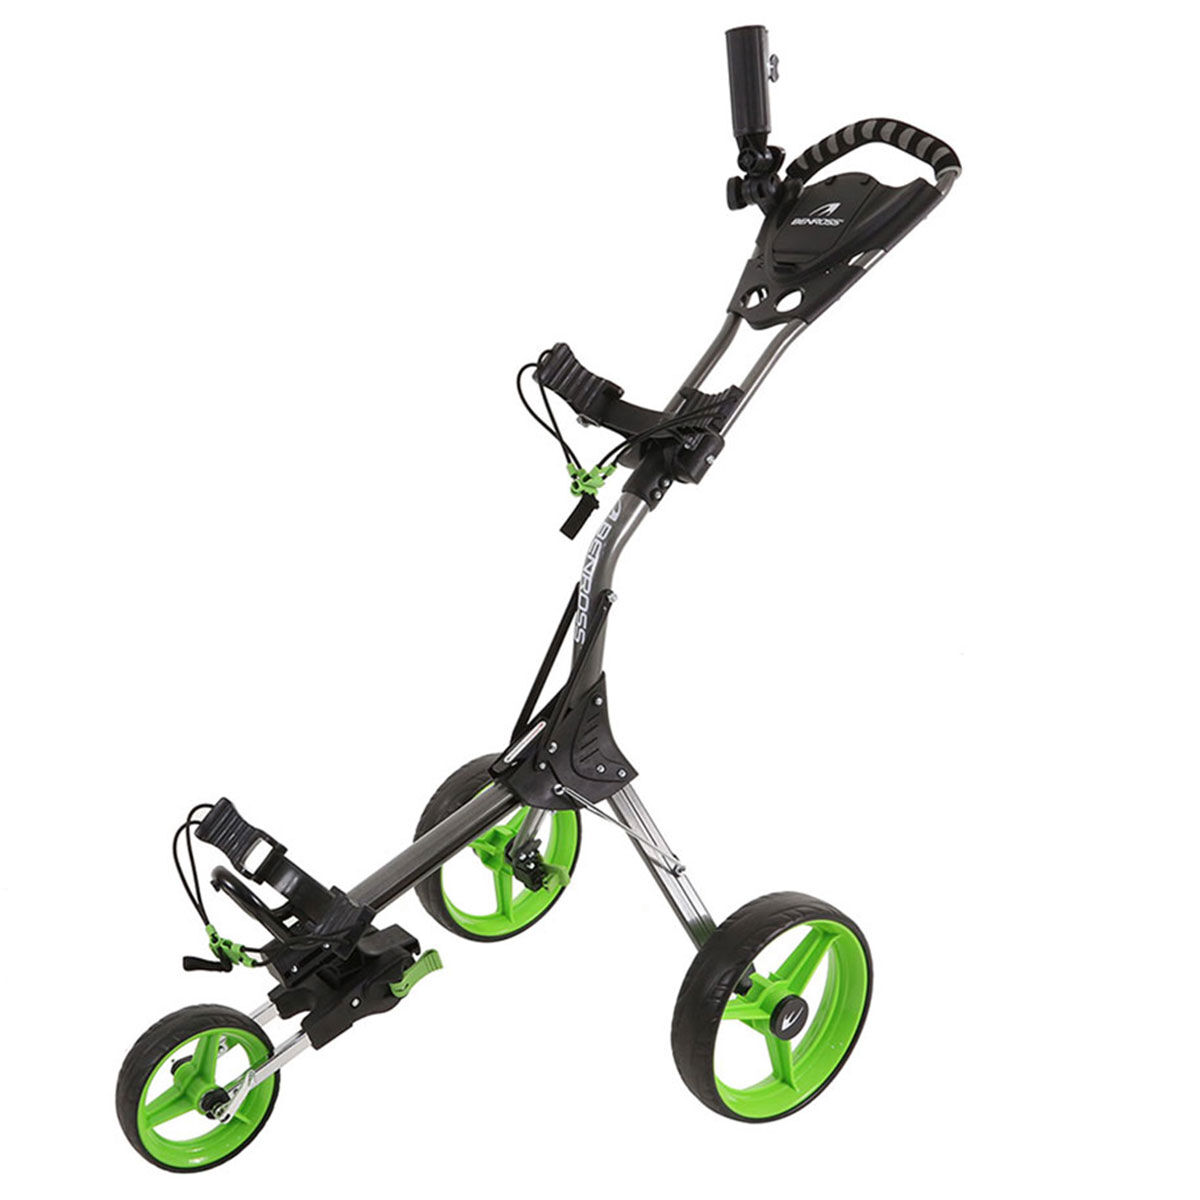 Benross Black and Green Lightweight Charcoal Pro Compact Push Golf Trolley | American Golf, One Size